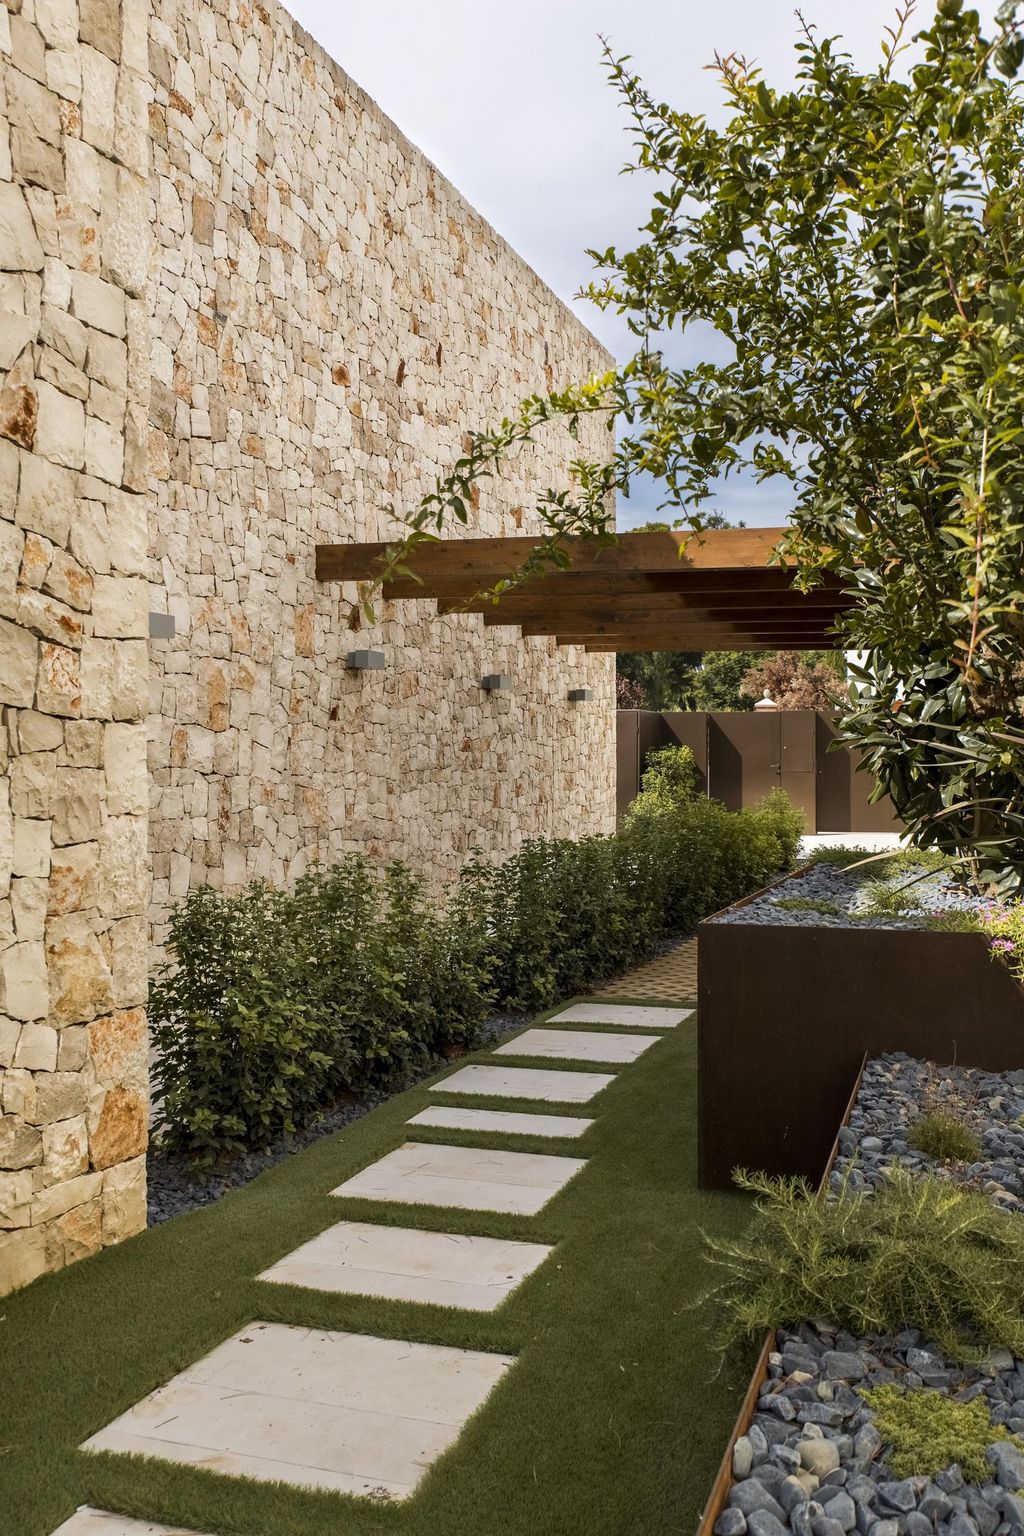 Casa R Created from two Parallel Stone Walls by Ascoz Arquitectura